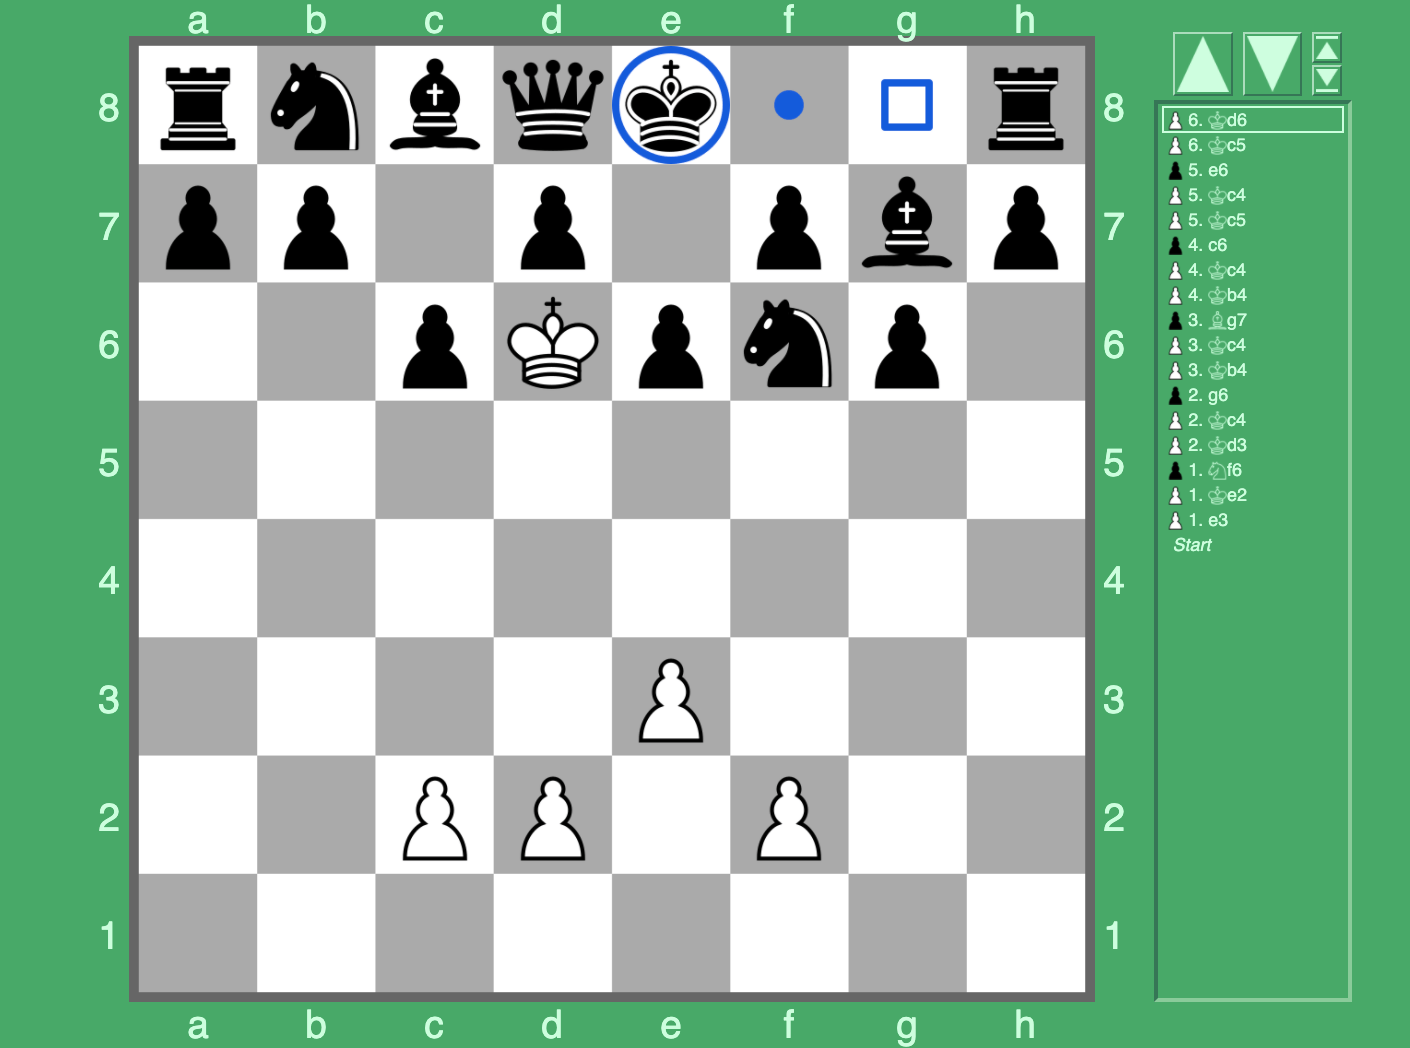 Monster Chess - Chess Forums - Page 7 